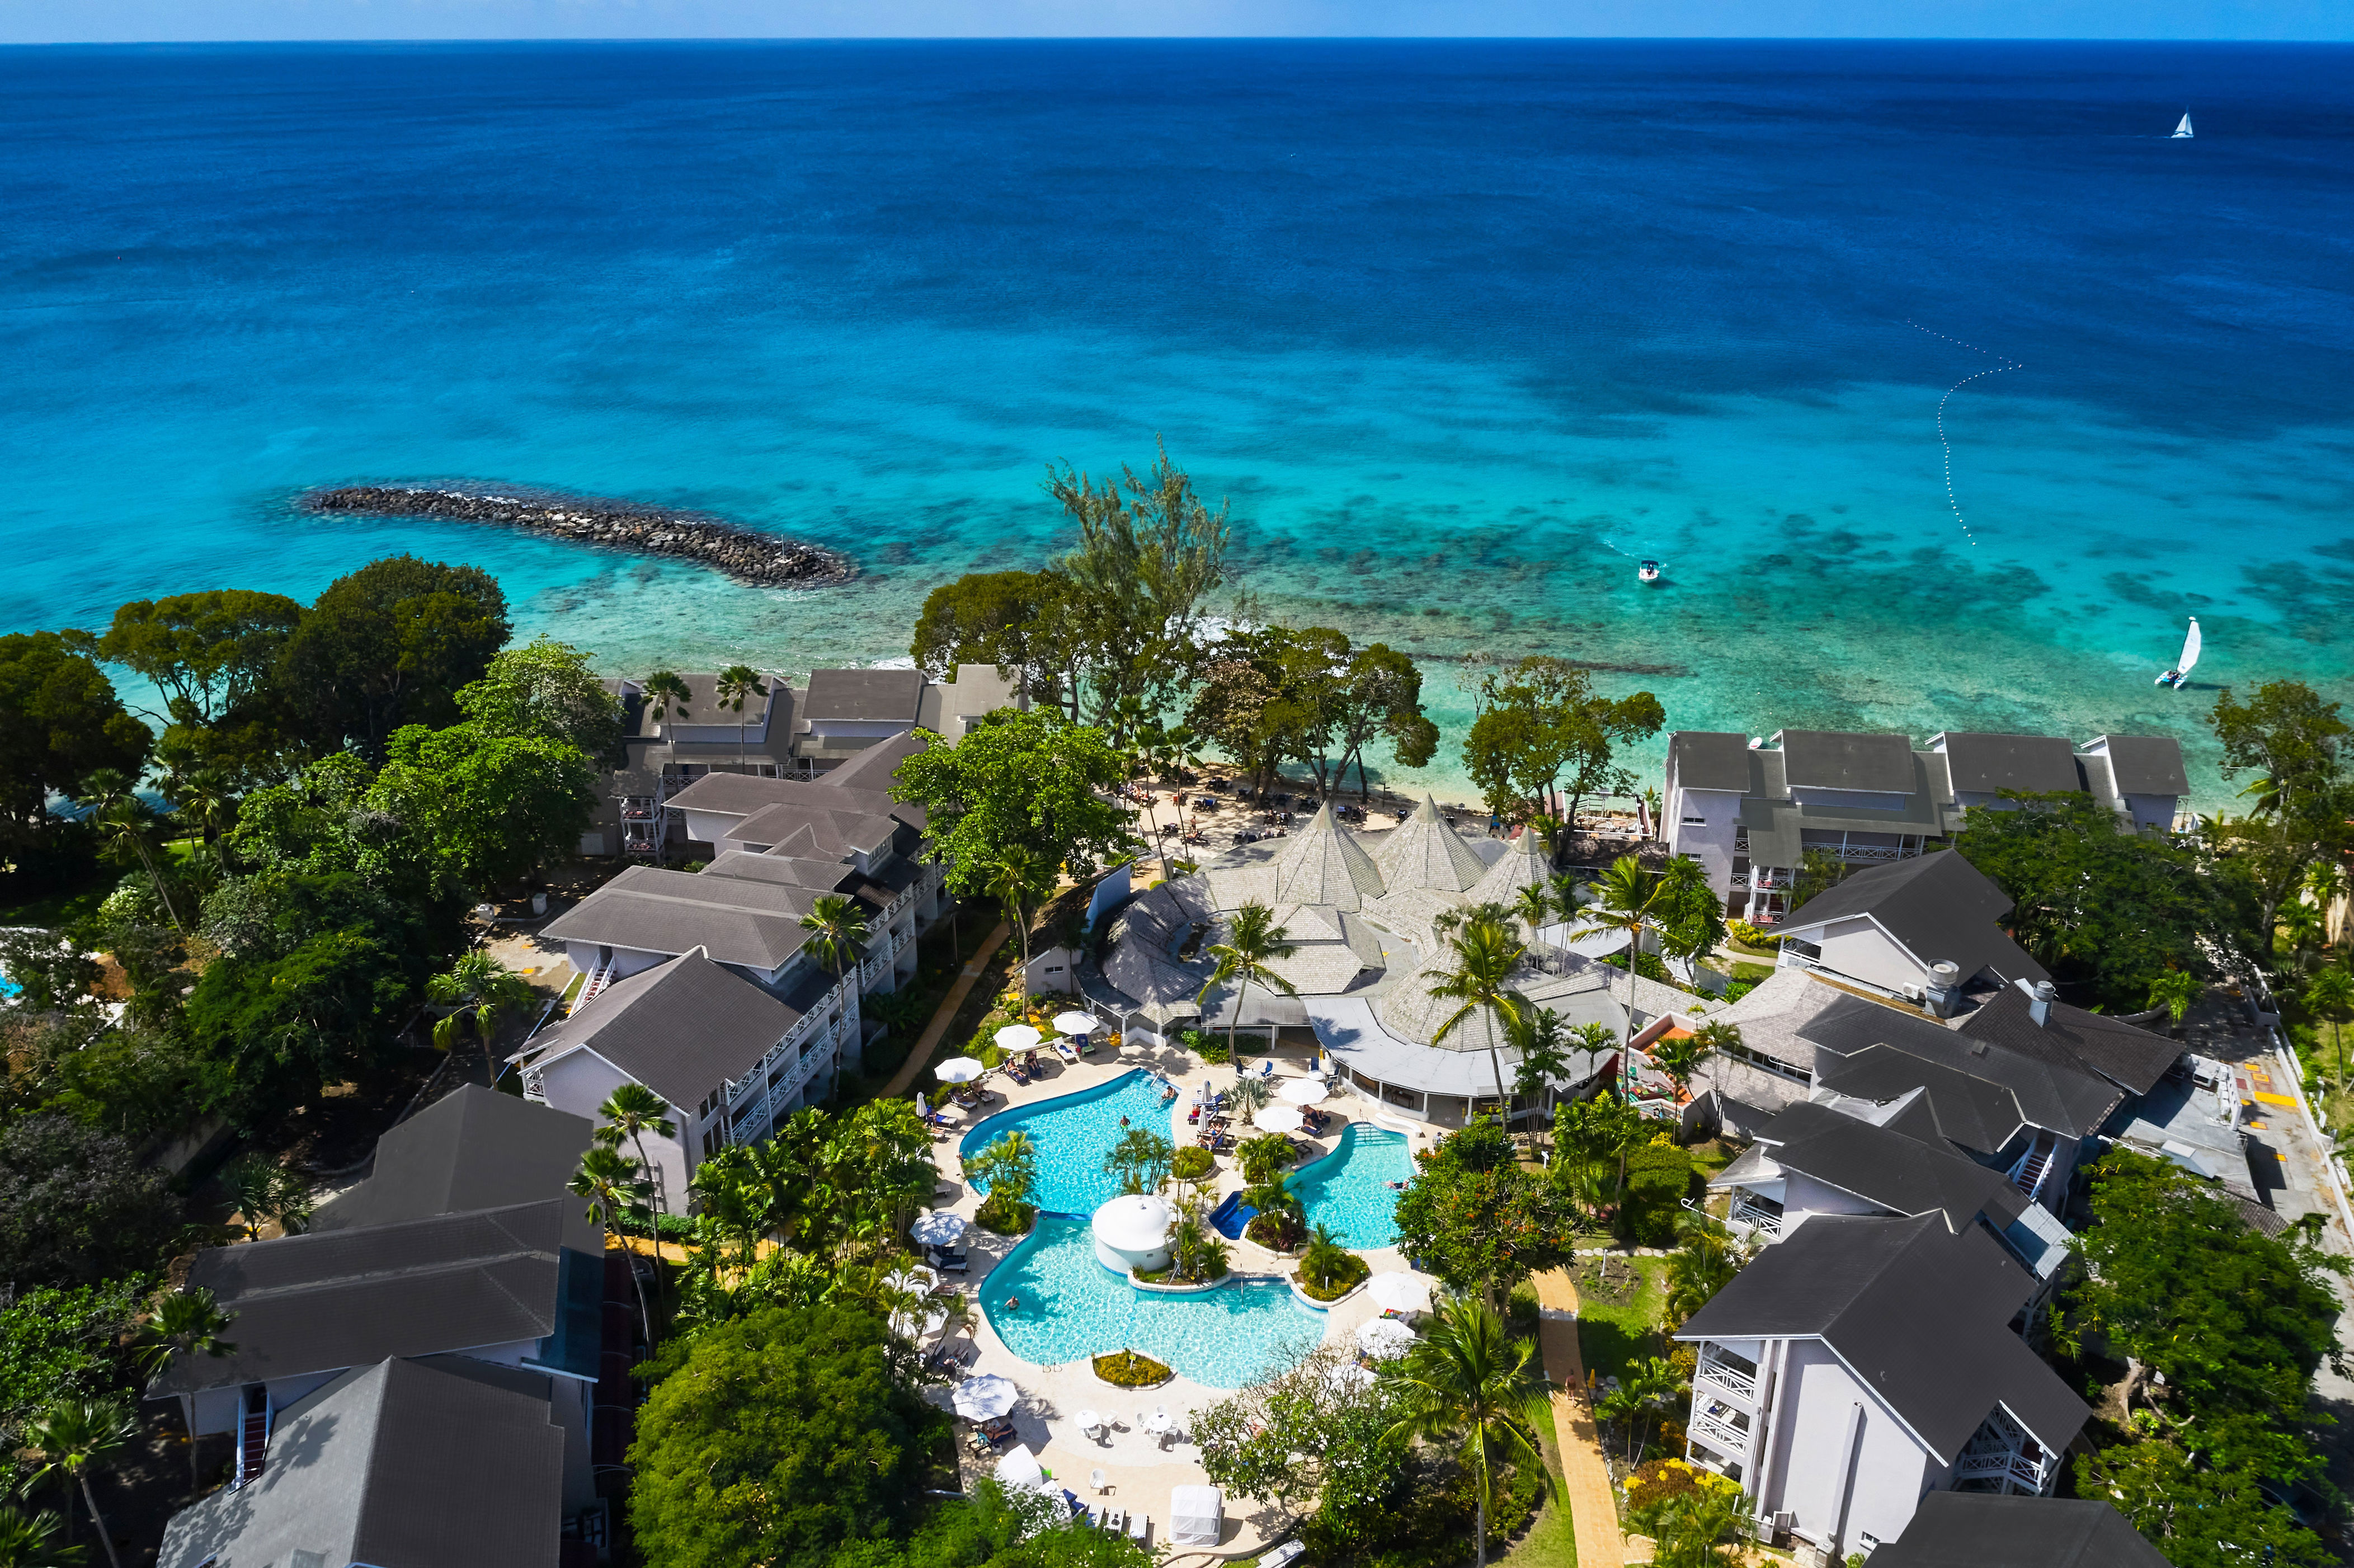 <p><strong>Top amenities included:</strong> Water sports, rum tastings, on-site piano bar<br> <strong>What’s nearby:</strong> <a href="https://www.cntraveler.com/hotels/barbados/holetown/sandy-lane-barbados?mbid=synd_msn_rss&utm_source=msn&utm_medium=syndication">Sandy Lane’s</a> three golf courses, all bookable in advance</p> <p>You won’t get bored at this adults-only paradise on Barbados’ west coast. Included in the all-inclusive package is kayaking, paddle boarding, Hobie catamaran sailing, dance classes, rum tastings, and cooking classes—and that’s just scratching the surface. When you want a break, lounge at the spa, beach bar, or central pool, which will always have a good vibe without cannonballing children. Each of the 160 guest rooms offers spacious accommodations with garden or ocean views, and don’t miss the lively piano bar where guests sing along to classic oldies.</p> <div class="callout"><p><a href="https://cna.st/affiliate-link/4iheeJwWD8ieHvgE4QS2ww2NgLdLKM3duVwFJf7KdCPBqLR2e4QkWqanPWMnKd1VTD7qT6igwe2Mz9TZbm5PMV6WvXKZVzZSjXF66GRK9bNX3AwMPVMSAVfw5qfHG25e9VZYSb3WgLrAwoQ7yzK62R4Avp7p26bXL8qvJN6KdNRqCvJuvPzQKe3x6z" rel="sponsored" title="Book now at Expedia">Book now at Expedia</a></p> <p><a href="https://cna.st/affiliate-link/MKEh7BpQXwWWMvycFimWDhV7ujdQiA7y9pCWEwsaJNMiYCBptGkwd82KWcY3o2kjSvtesi1XBYLqN6nhP4sCDRoFBFHsMLA67dS1yF2LavFpKxdJaHmFvjhNYPYxSNAmoCE87eT9qdhNWN92Ccgta8pobcA87rpwx" rel="sponsored" title="Book now at Booking.com">Book now at Booking.com</a></p> </div><p>Sign up to receive the latest news, expert tips, and inspiration on all things travel</p><a href="https://www.cntraveler.com/newsletter/the-daily?sourceCode=msnsend">Inspire Me</a>